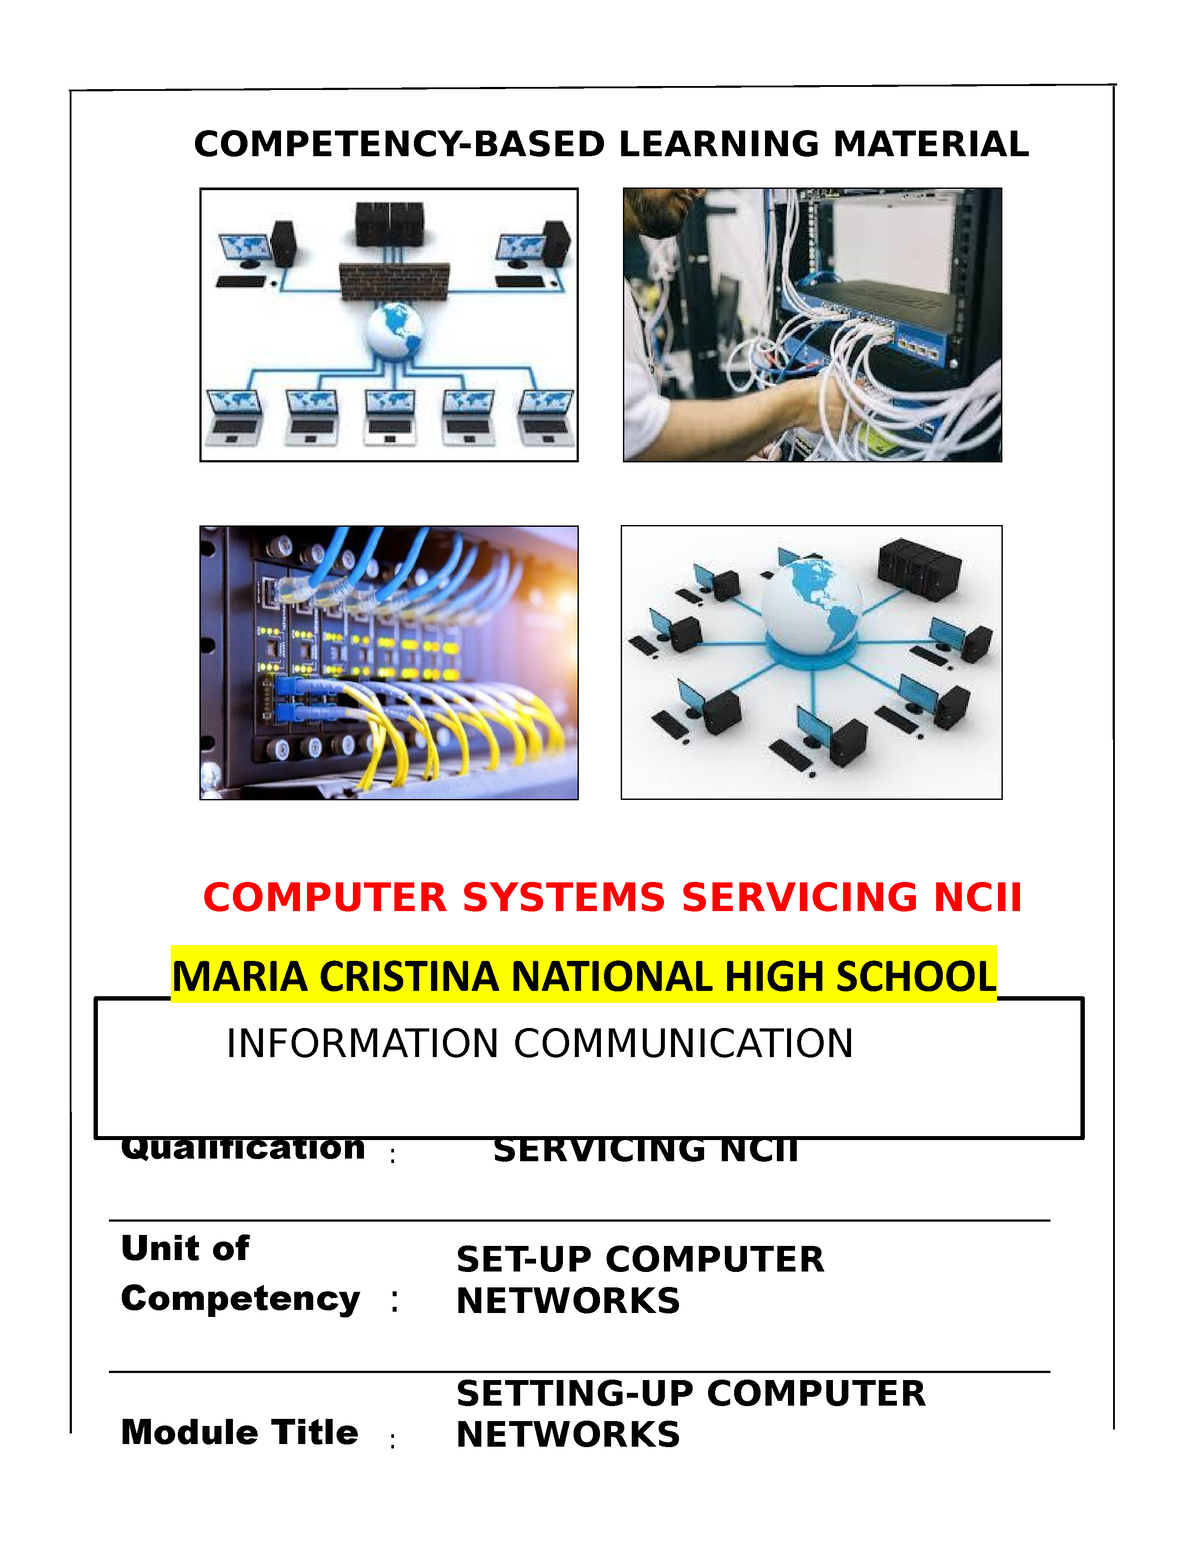 research paper about computer system servicing pdf